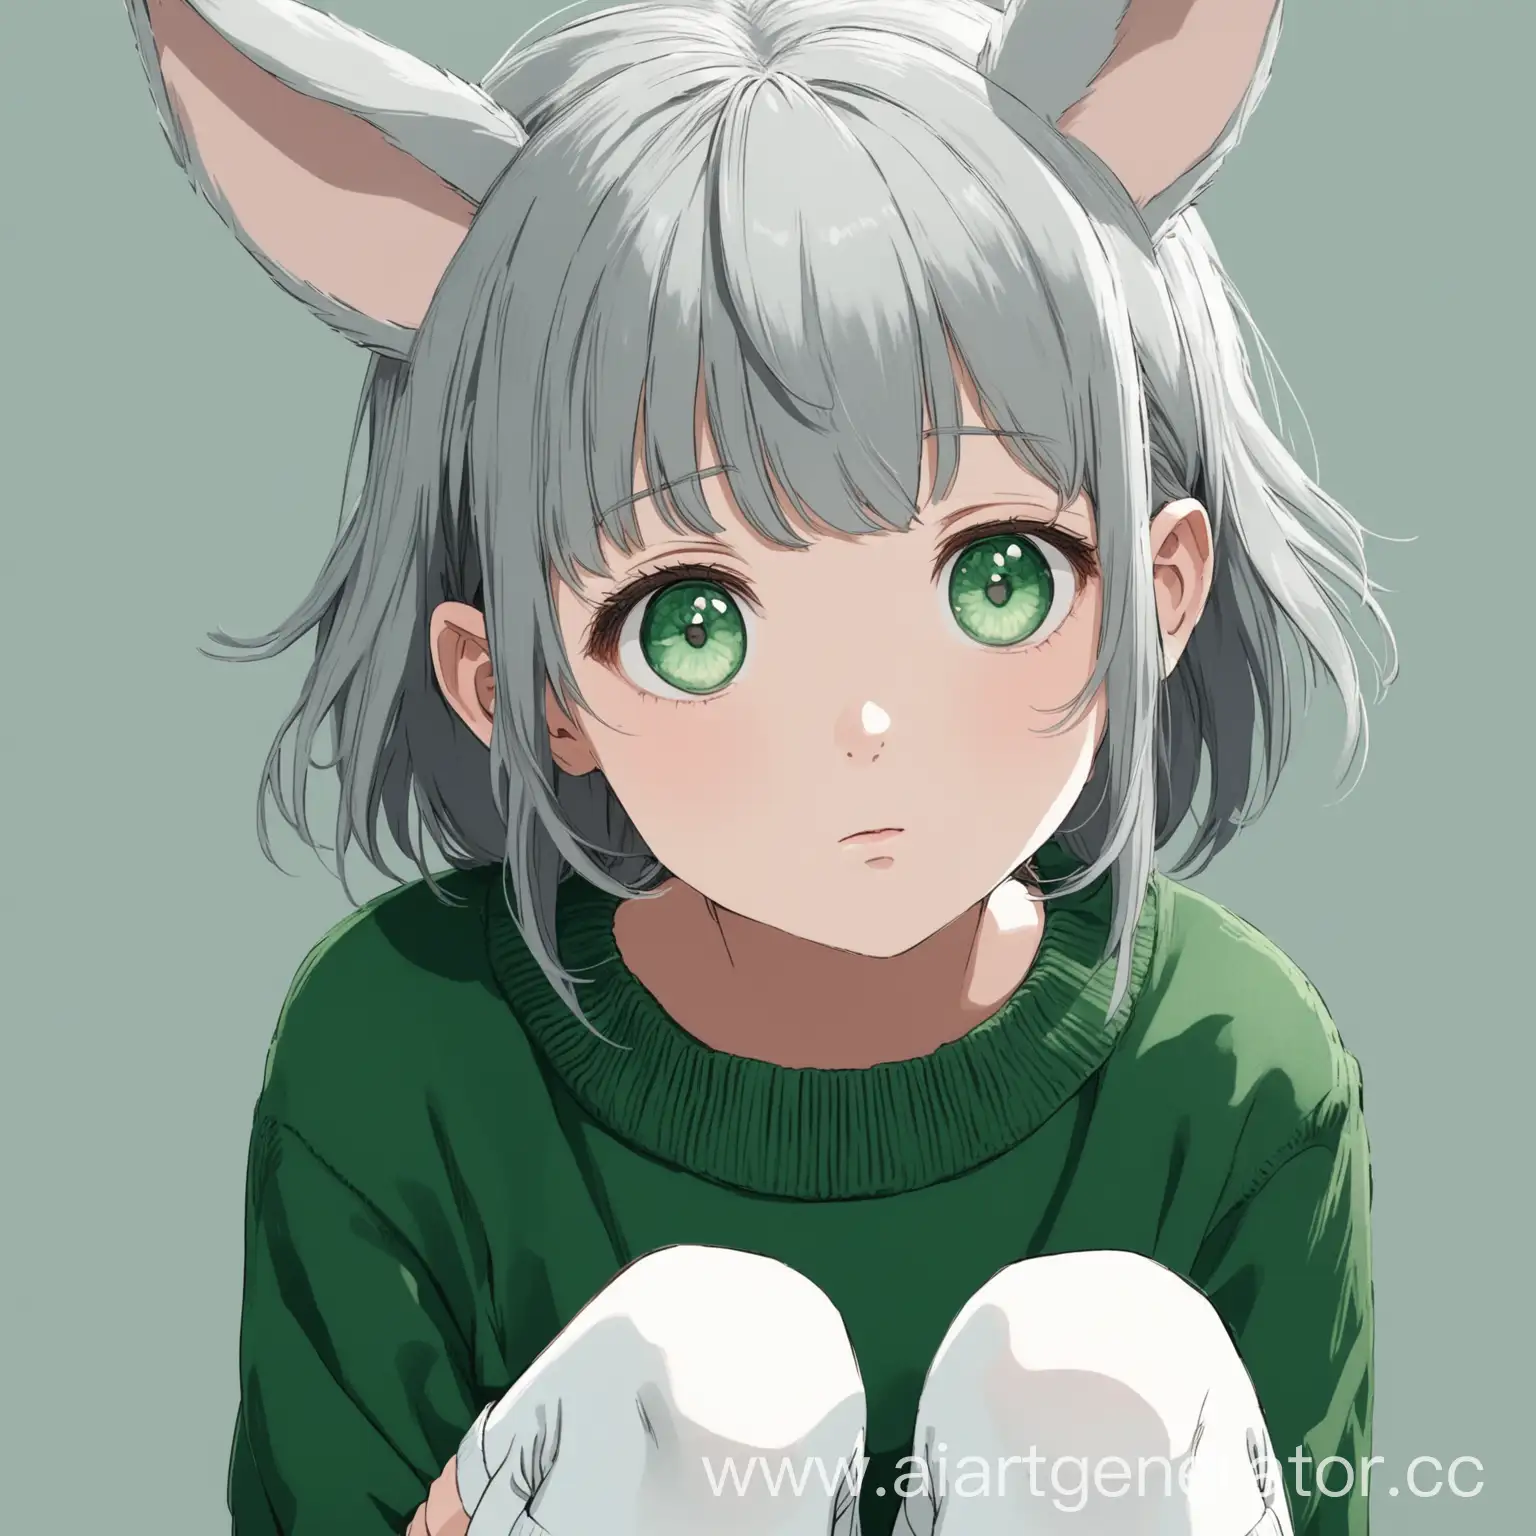 Girl-with-Gray-Hair-in-Green-Sweater-and-Ears-Headband